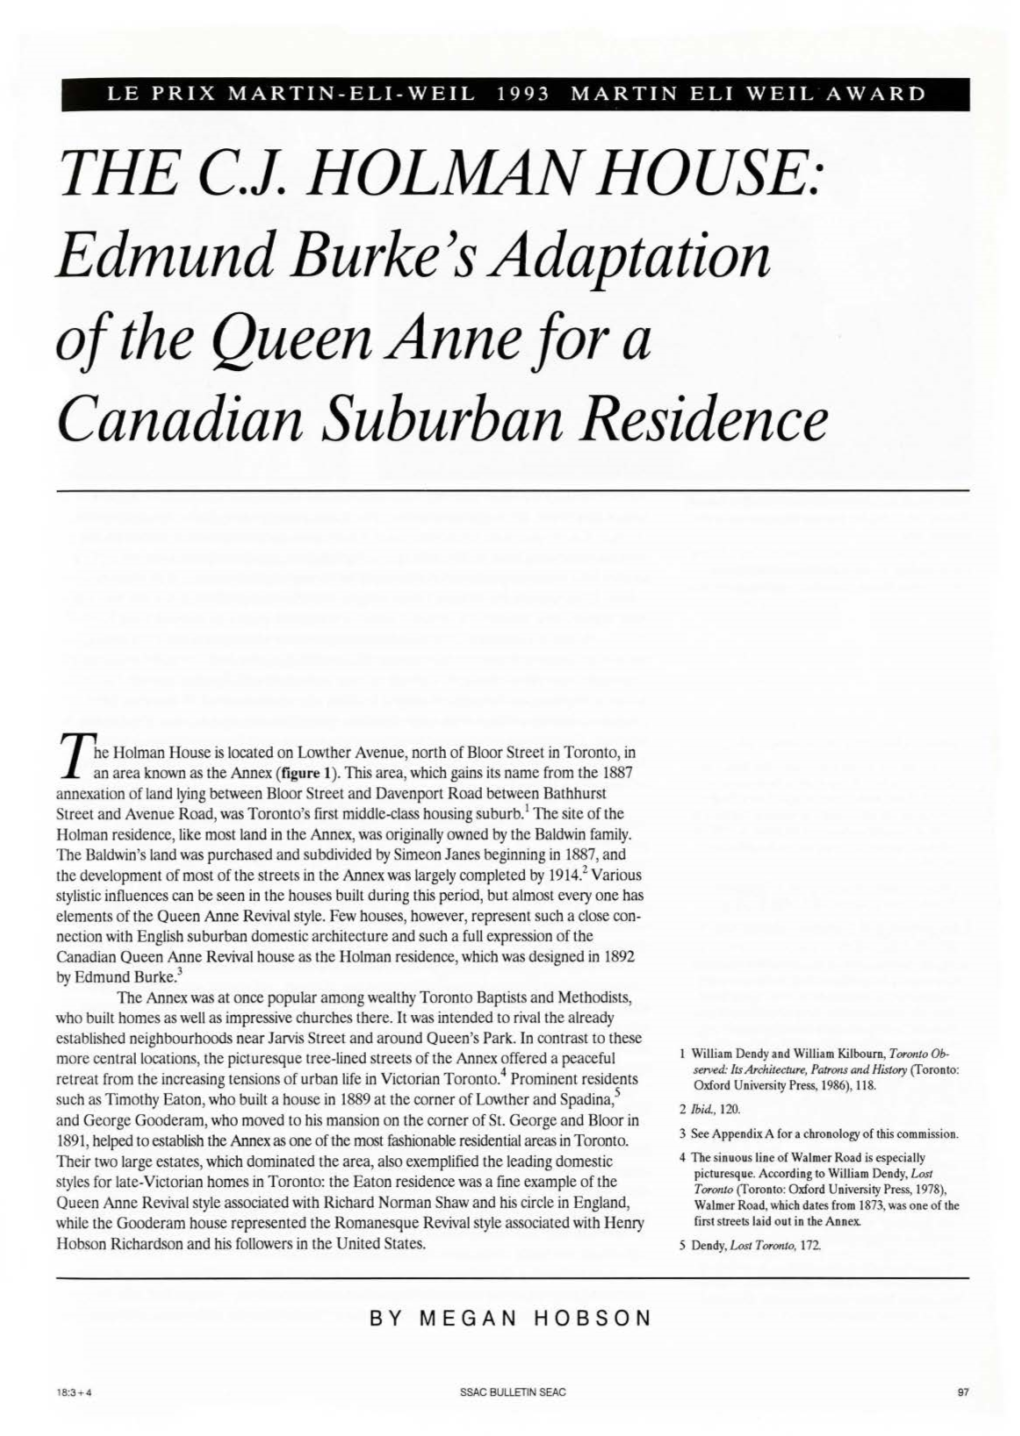 THE C.L HOLMAN HOUSE: Edmund Burke's Adaptation of the Queen Anne for a Canadian Suburban Residence